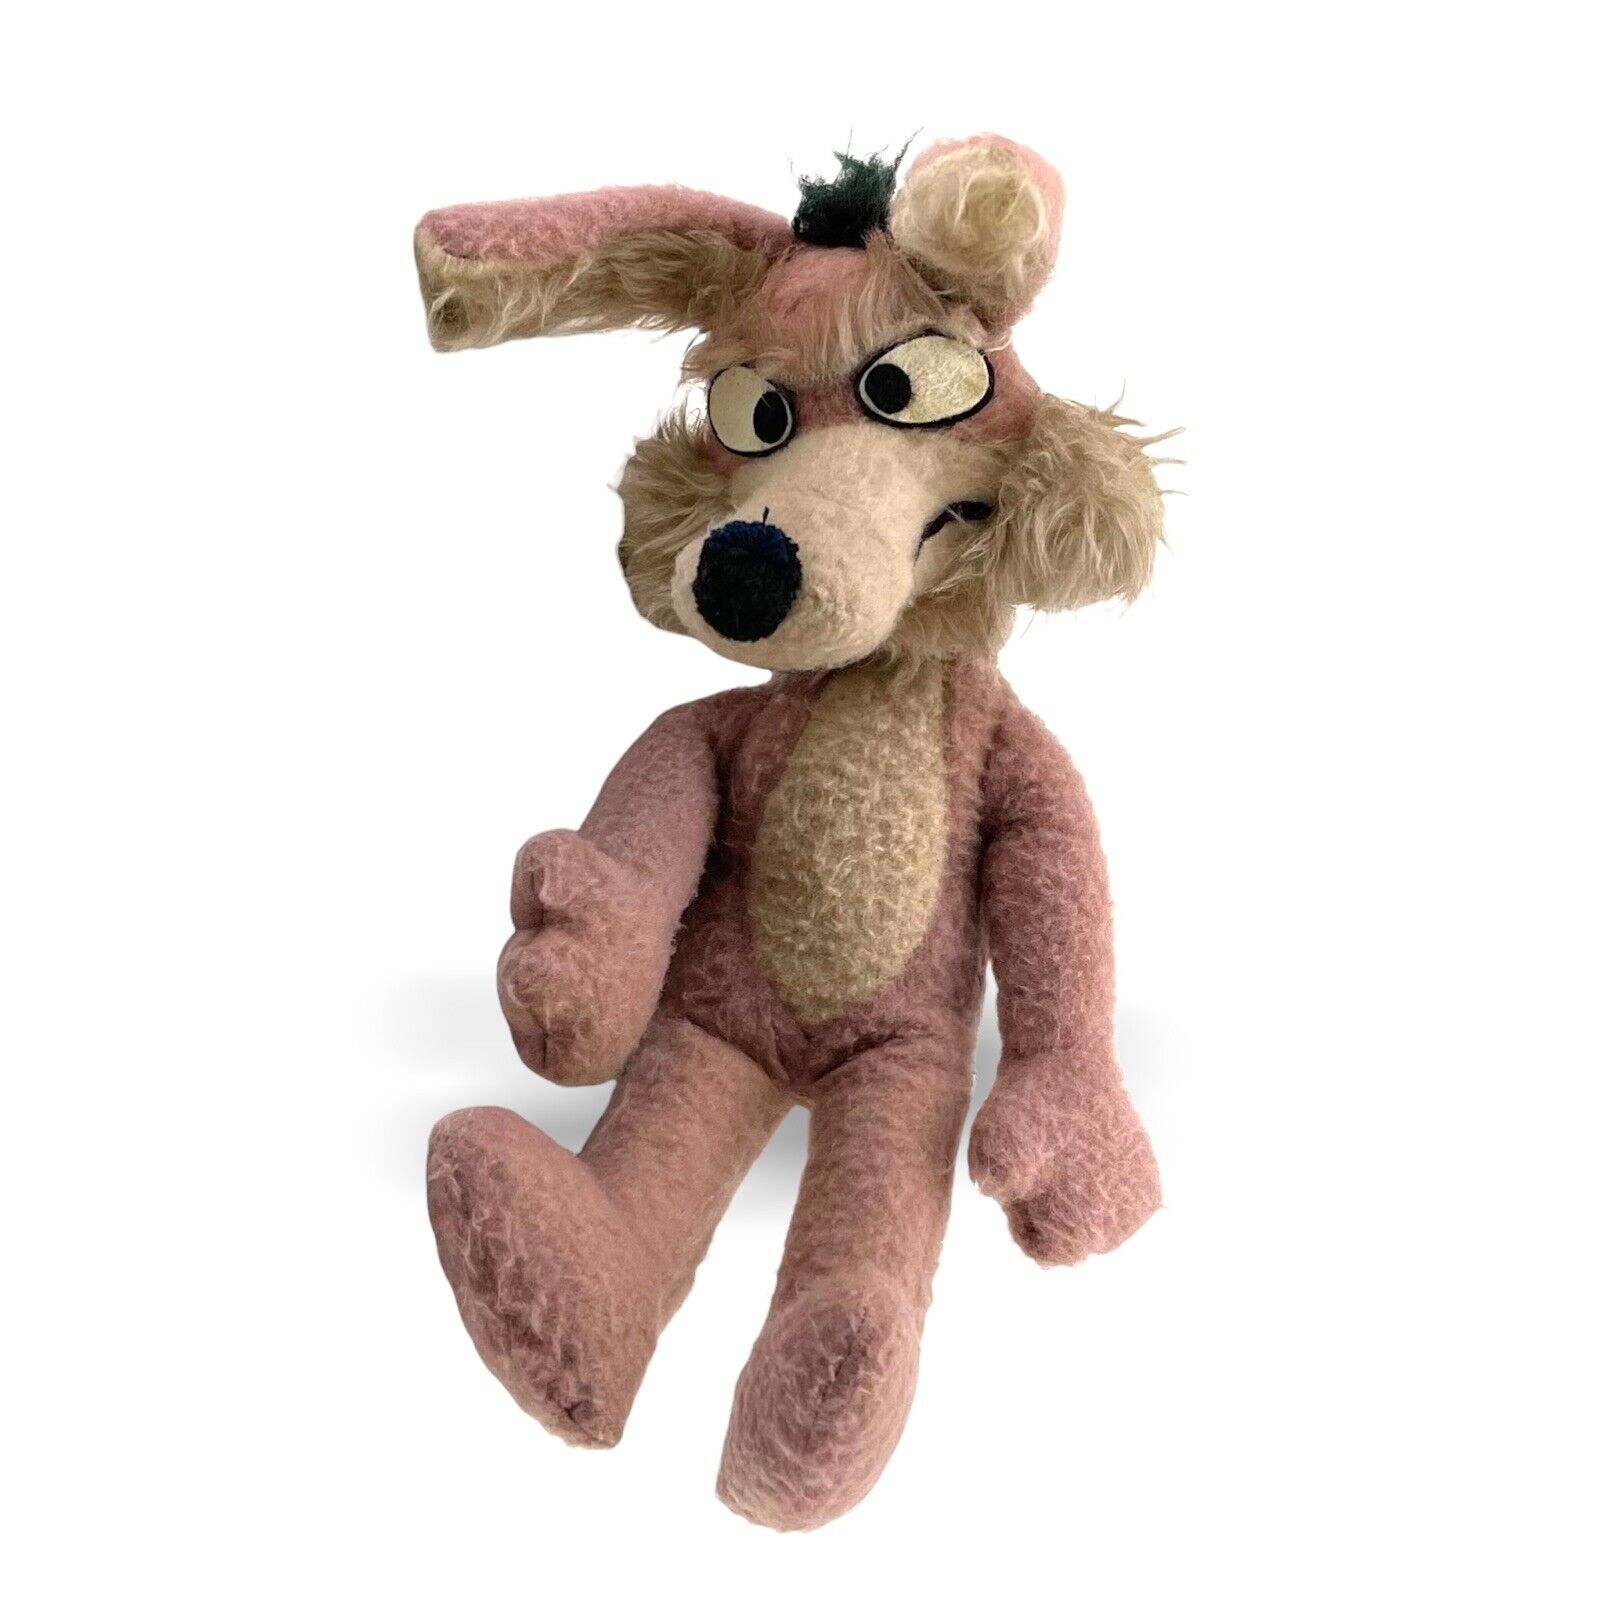 17” Vintage 1971 Mighty Star Warner Brothers Bros. Wylie Wile E. Coyote Plush